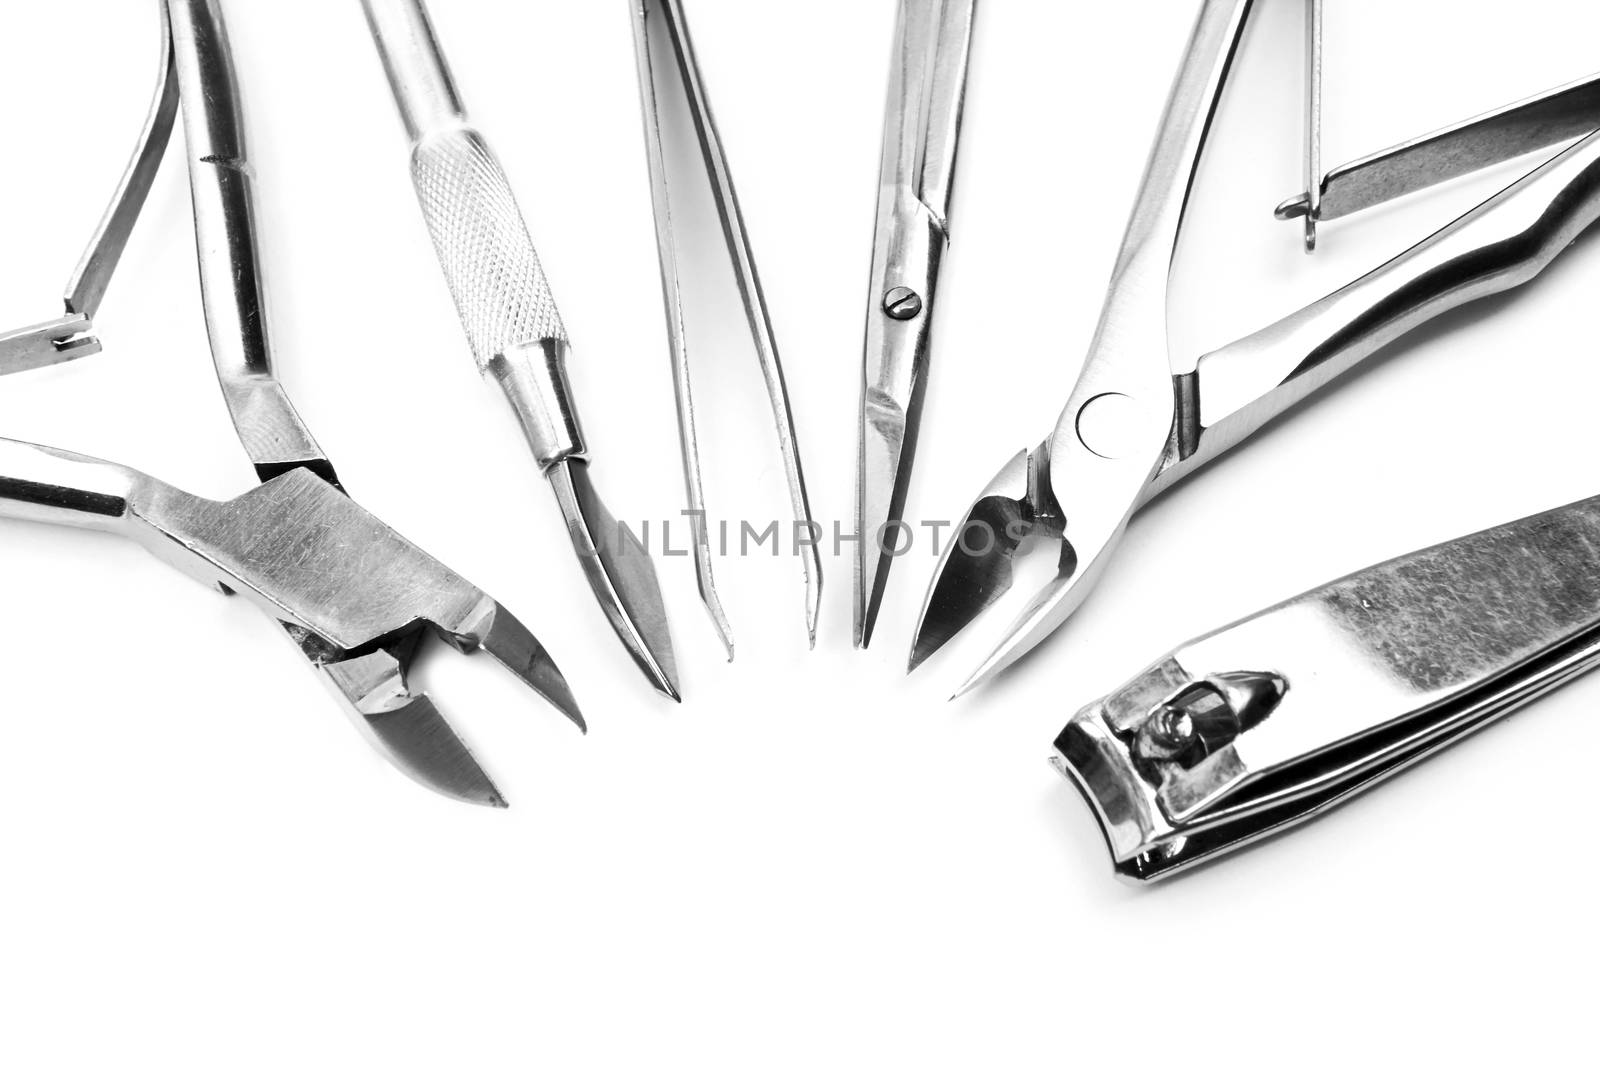 manicure tools by pioneer111